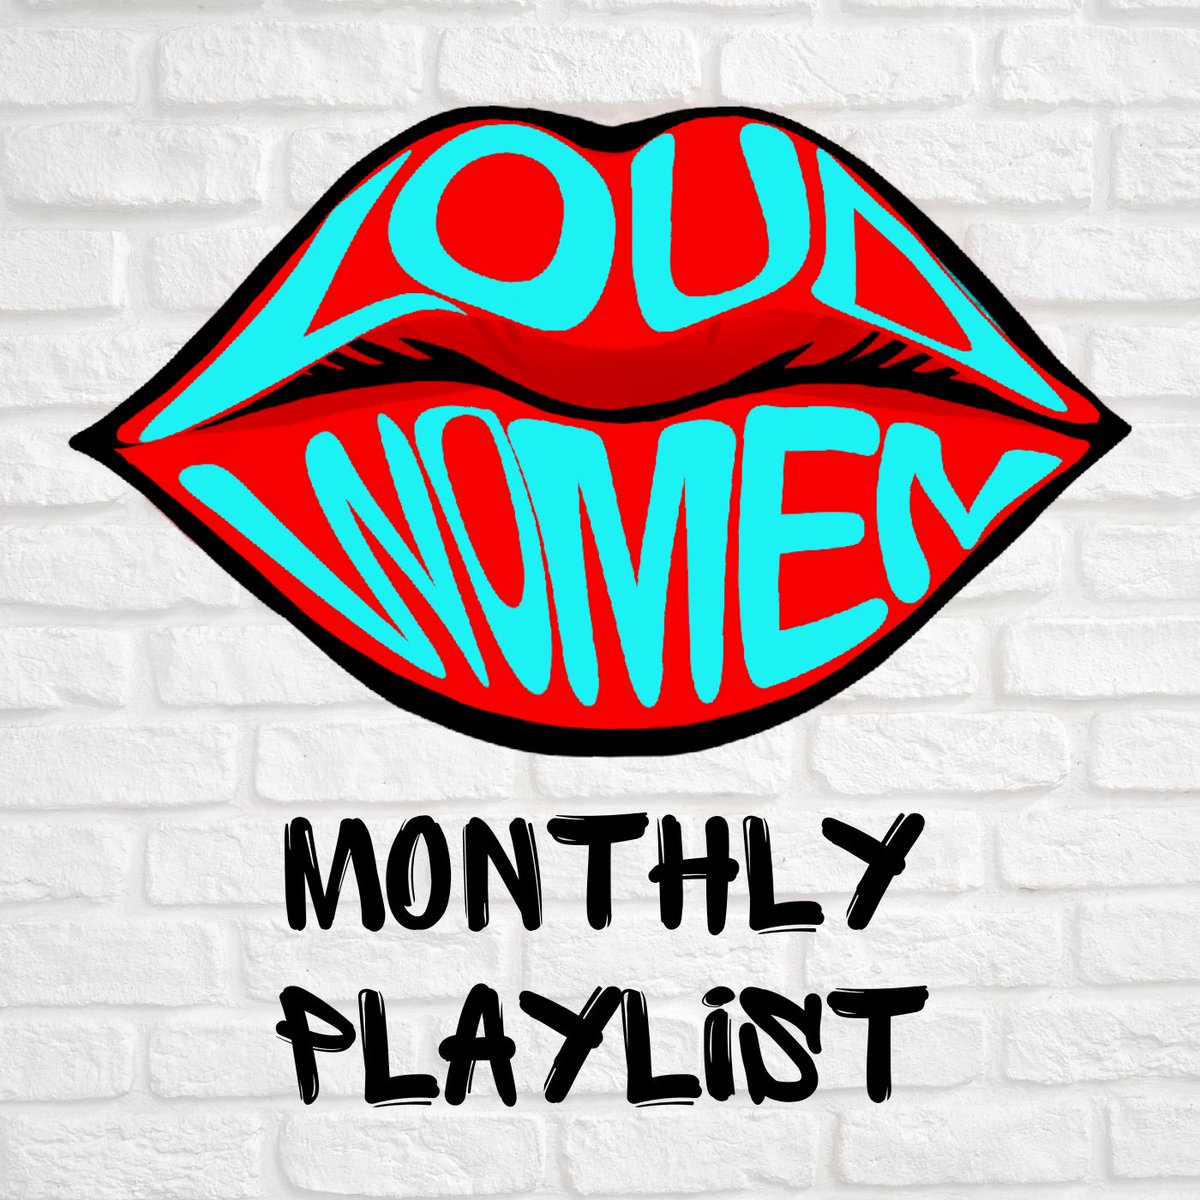 At the start of each month our Reva May updates our playlist of the best new LOUD WOMEN releases – make sure to save it so you get the updates first 💋 bit.ly/LOUDWOMENplayl… This month features: @queencultband @wearecowz @sohodollsmusic @frau13in @hanavuuu @edenintherain + more